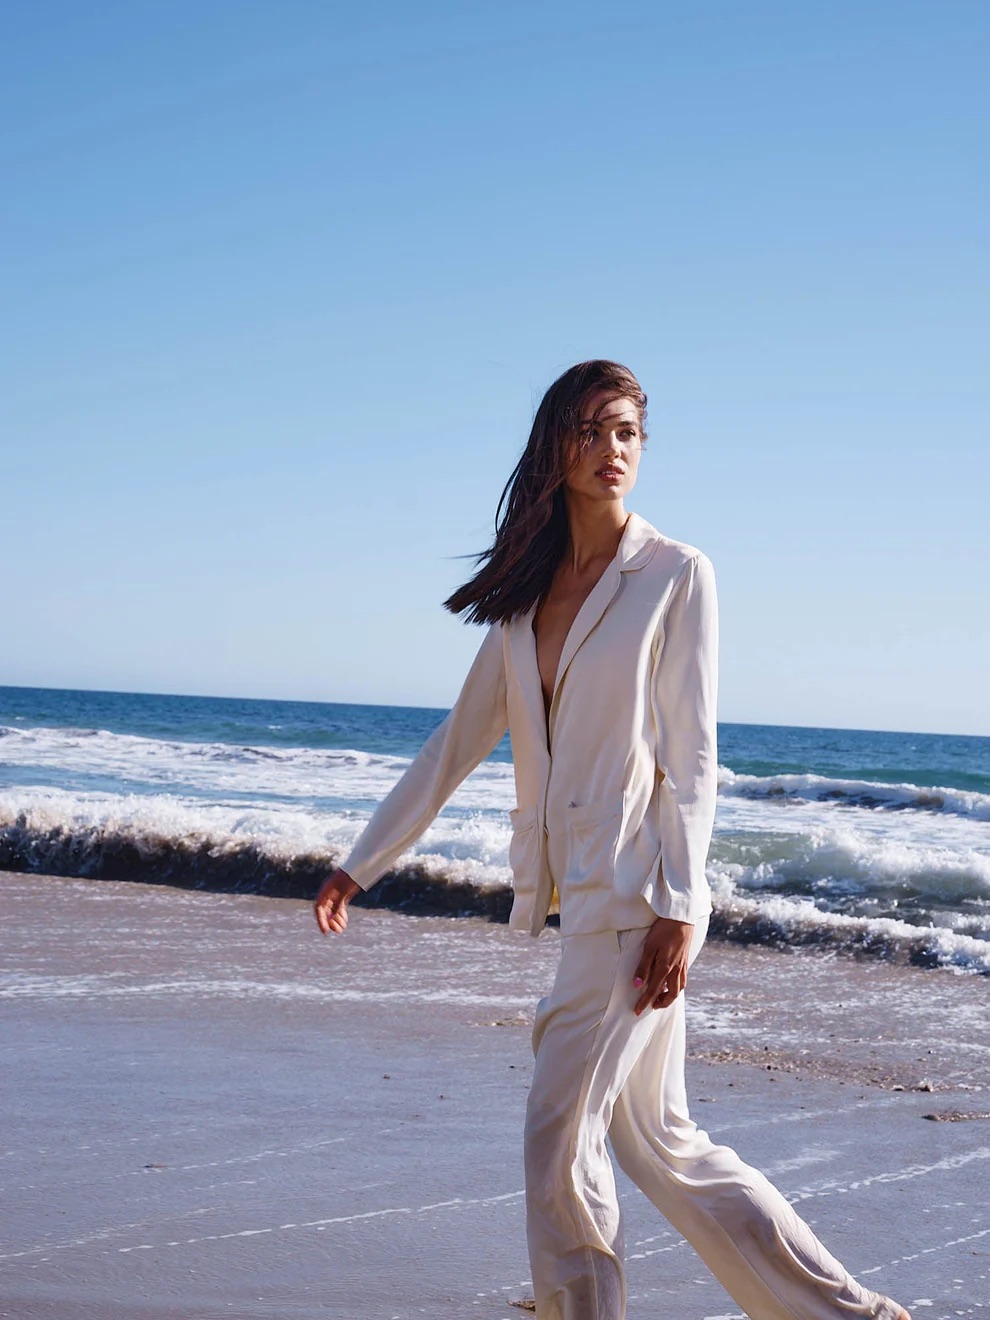 A woman in a white suit walks along a sandy beach with the ocean and waves in the background.